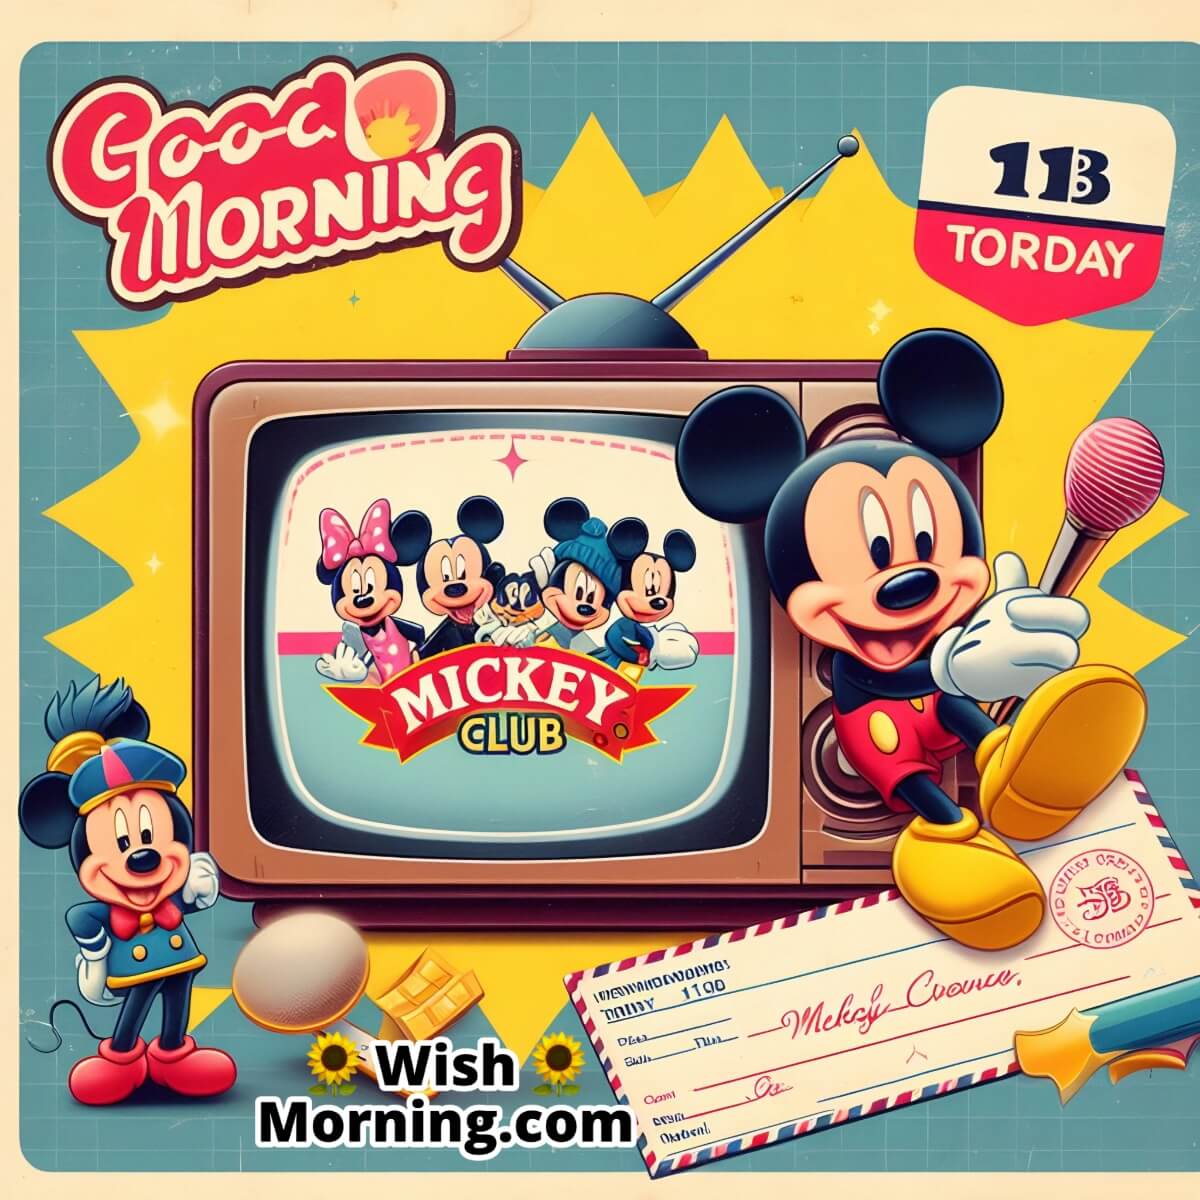 Good Morning The Mickey Mouse Club Television Show